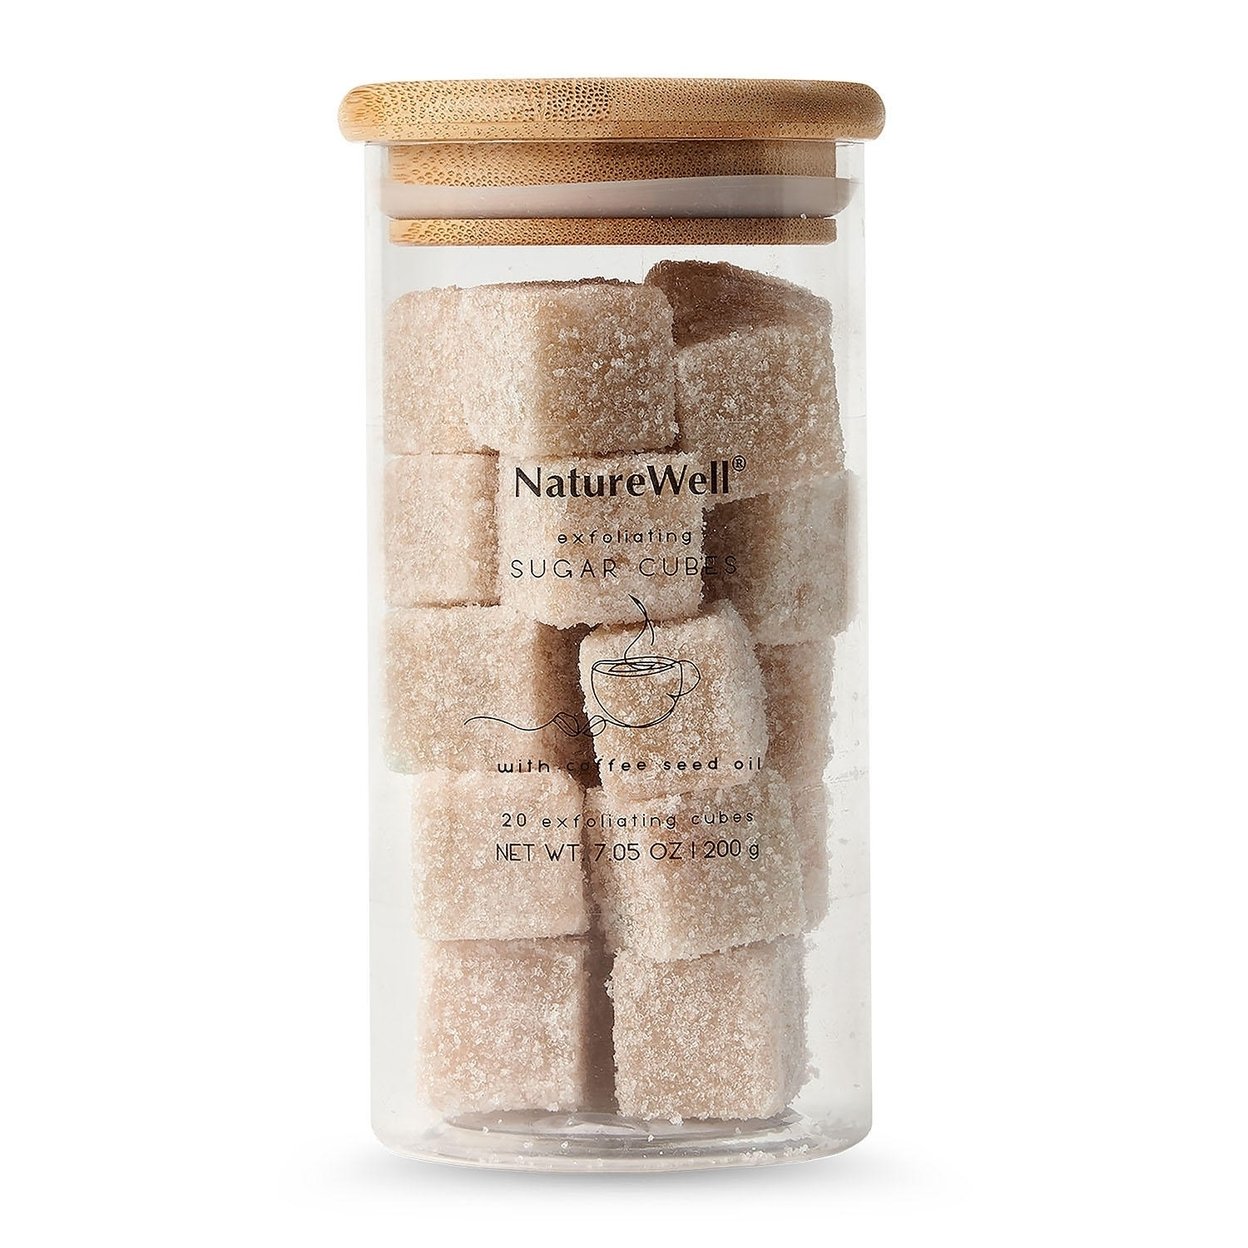 NatureWell Exfoliating Sugar Cubes, Grapefruit And Coffee, 20 Cubes (2 Pack)